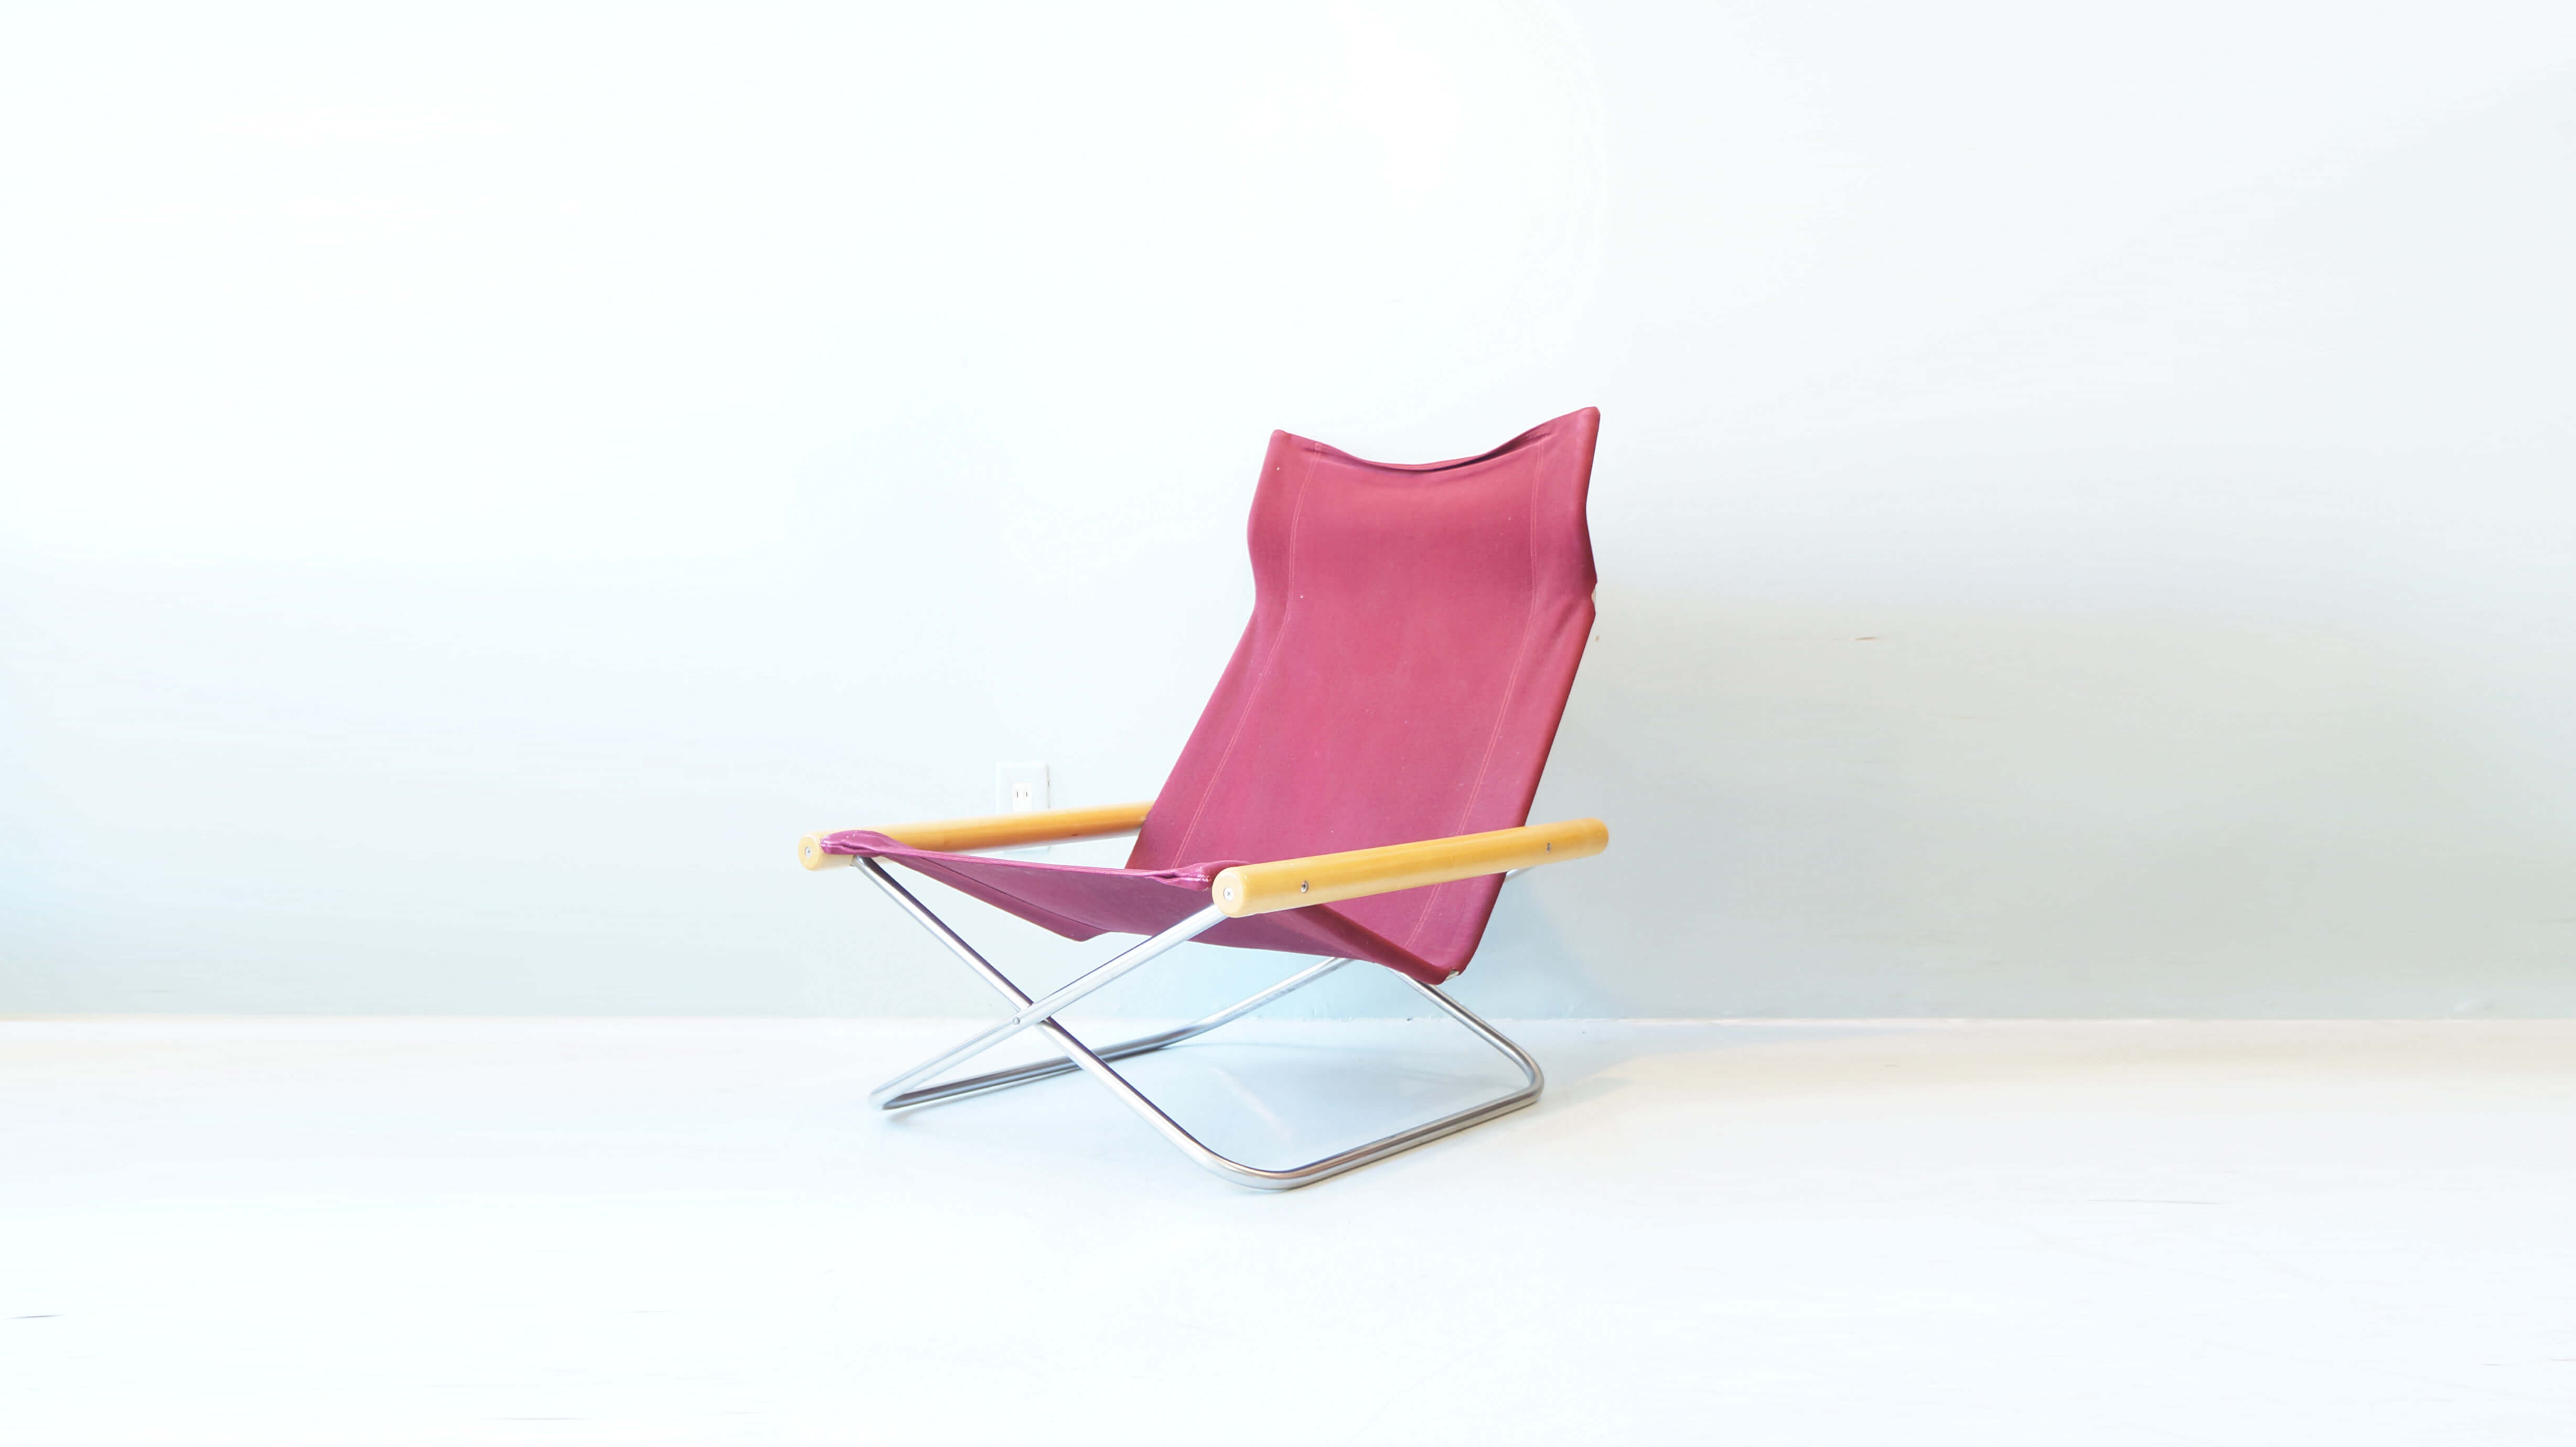 NY chair design by Nii TAKESHI Lounge Chair / ニーチェア 新居猛 デザイン ラウンジチェア